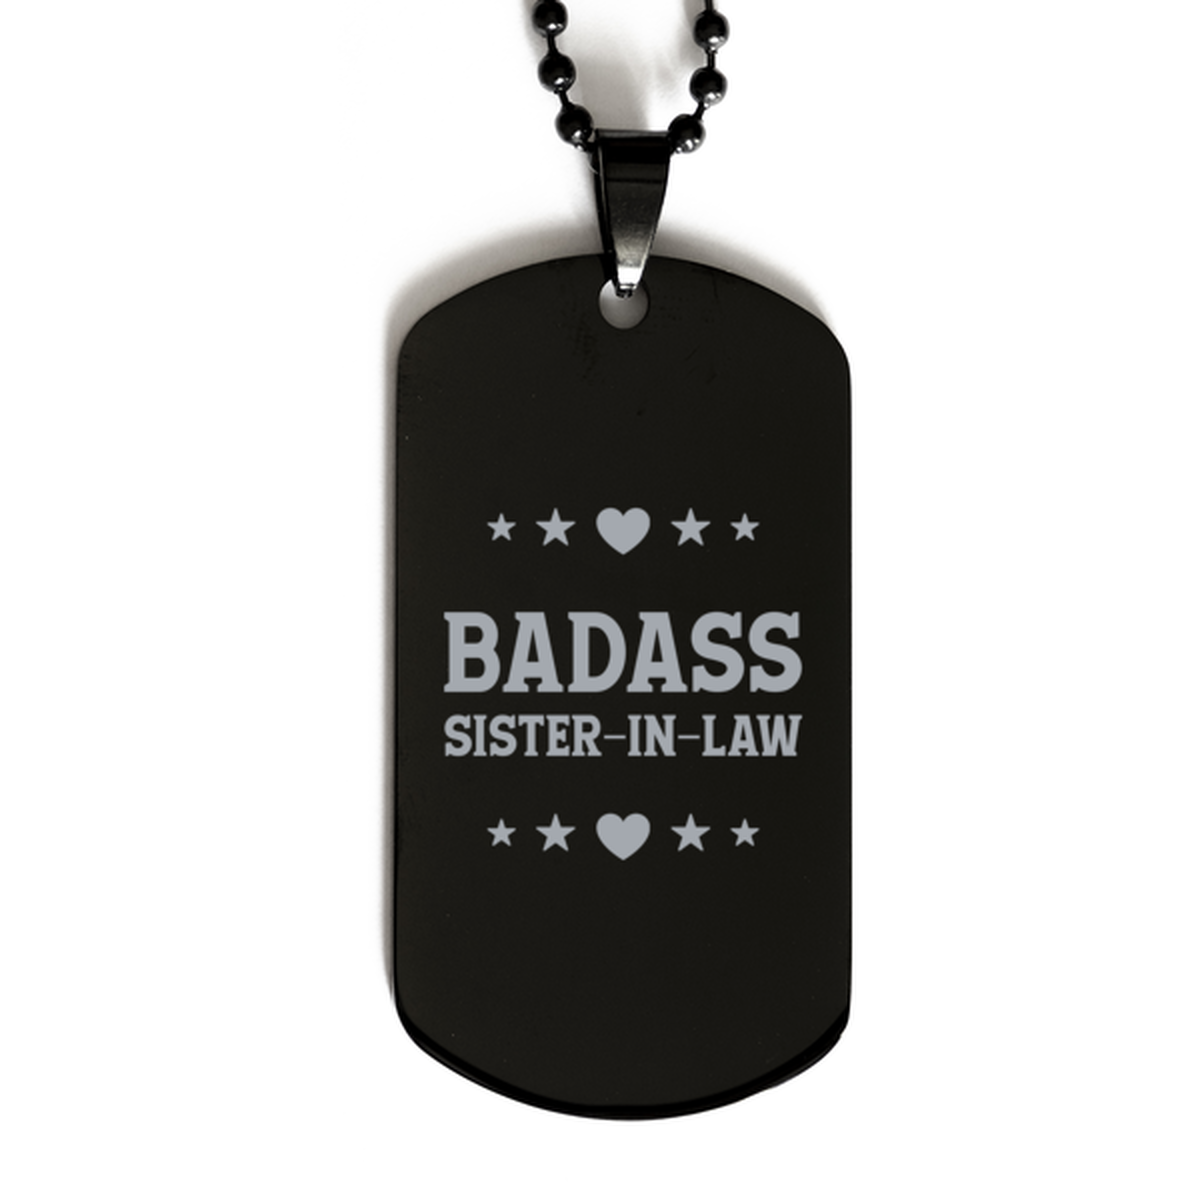 Sister-in-law Black Dog Tag, Badass Sister-in-law, Funny Family Gifts  Necklace For Sister-in-law From Brother Sister